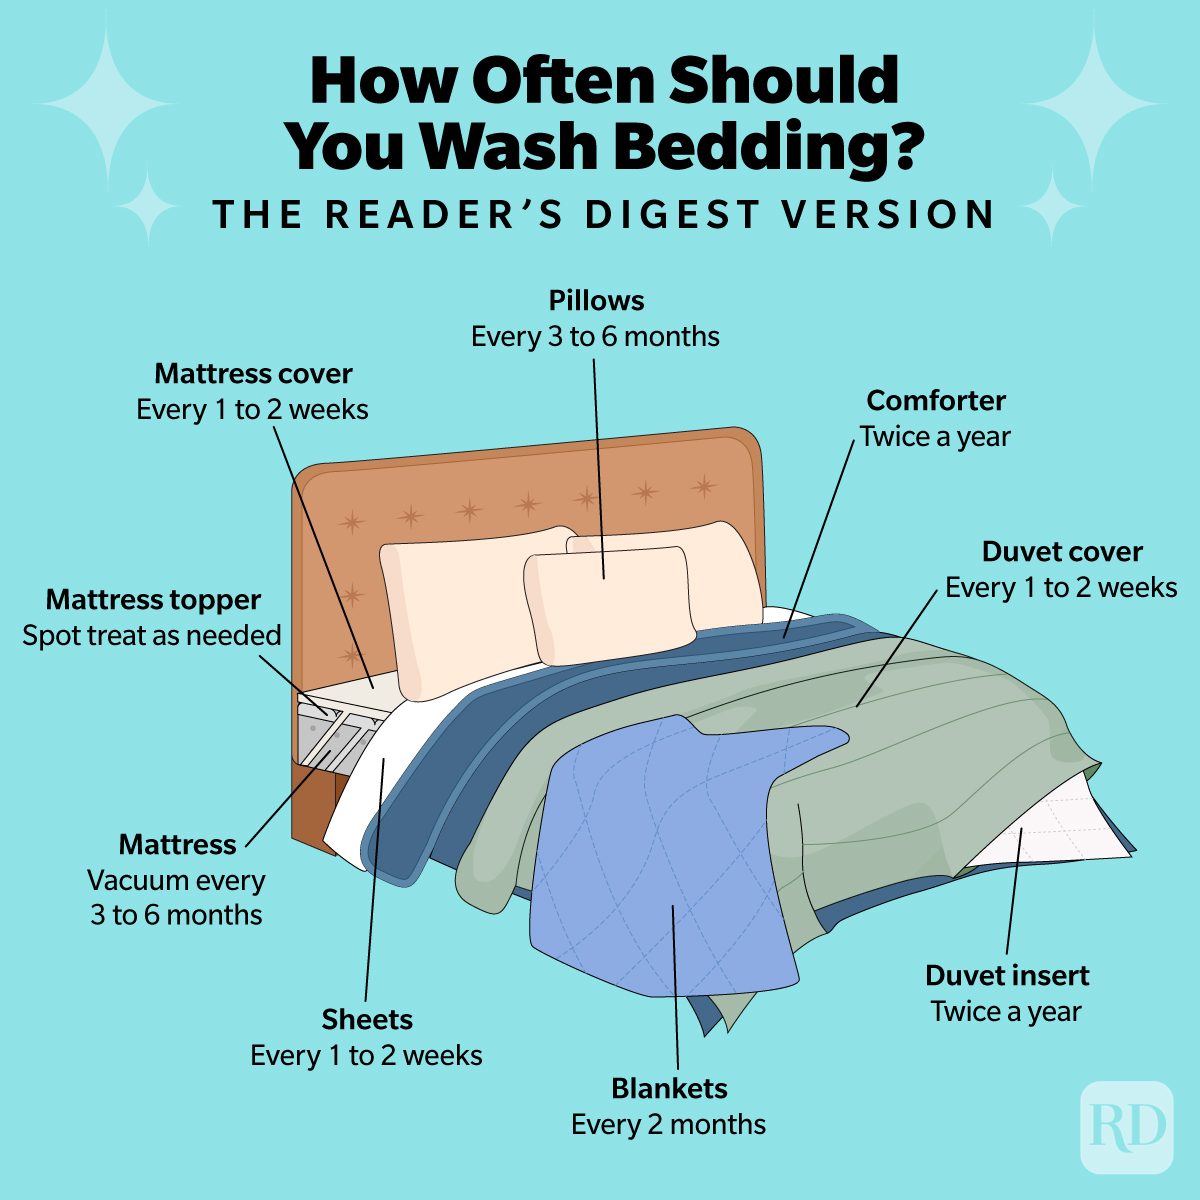 How frequently should you wash your bed sheets? More often than